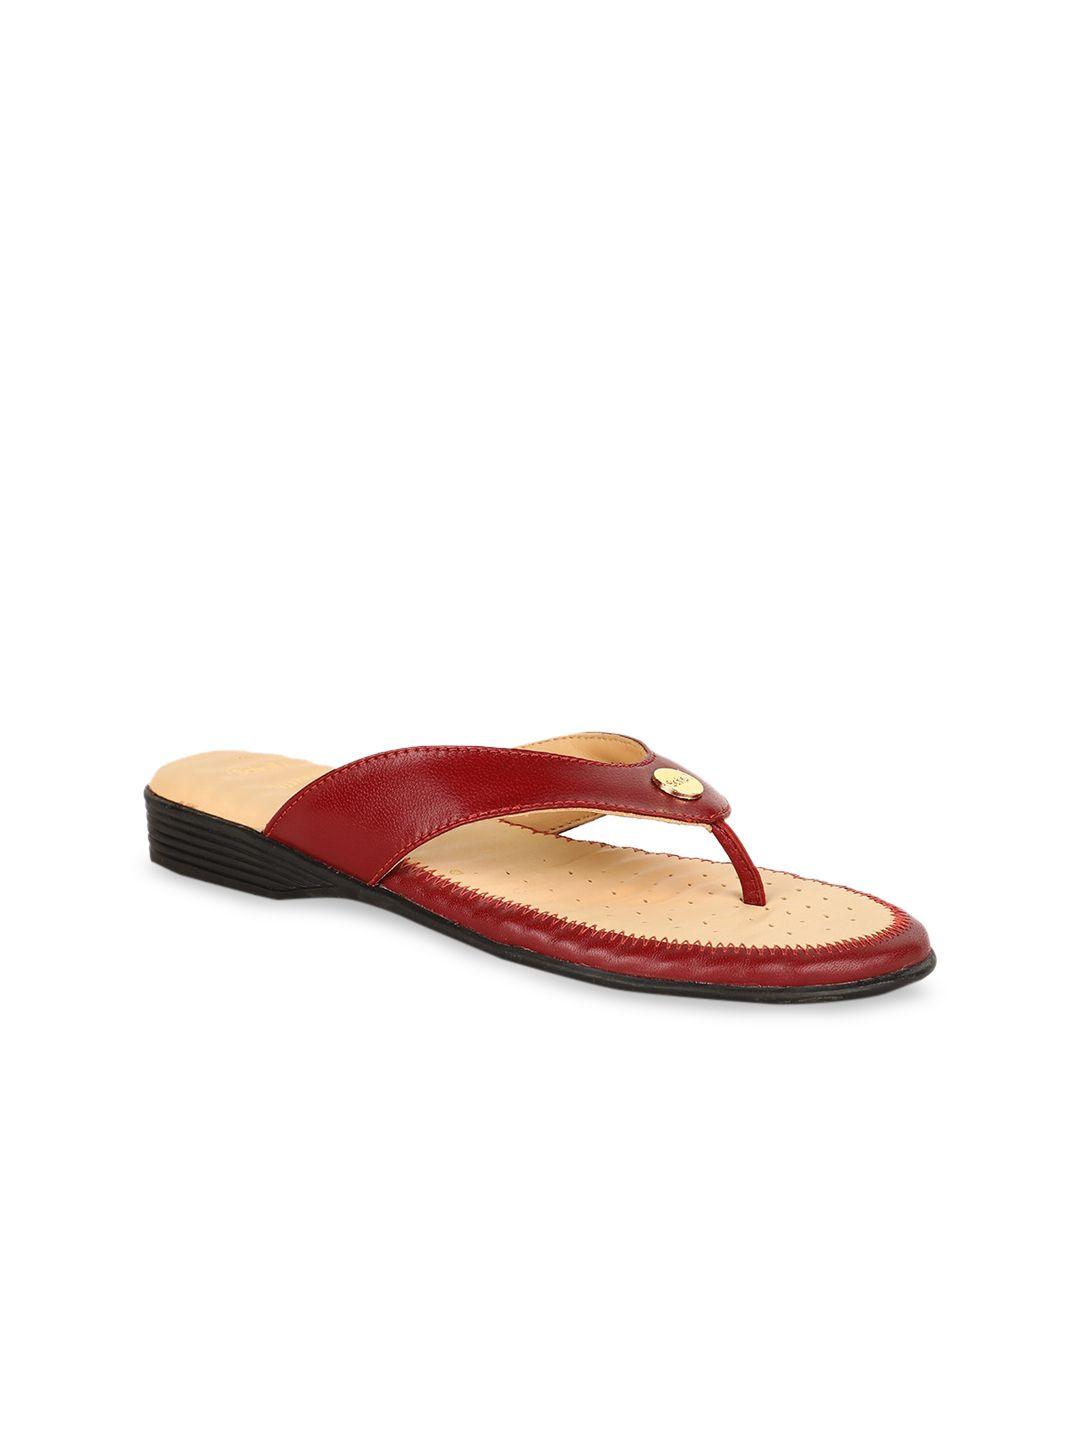 scholl-women-red-solid-leather-open-toe-flats